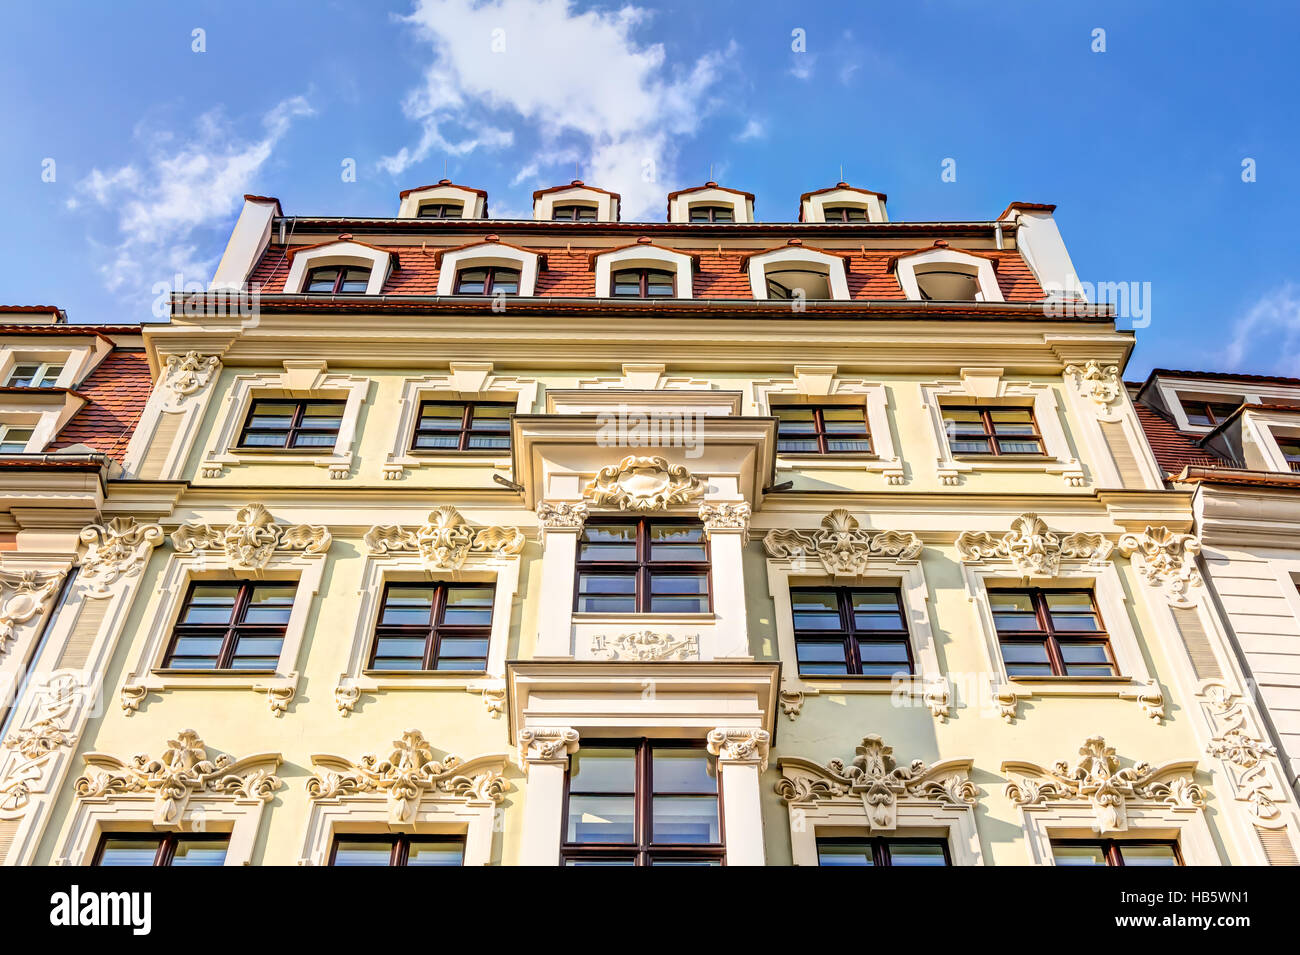 Residential buildings in Baroque style Stock Photo